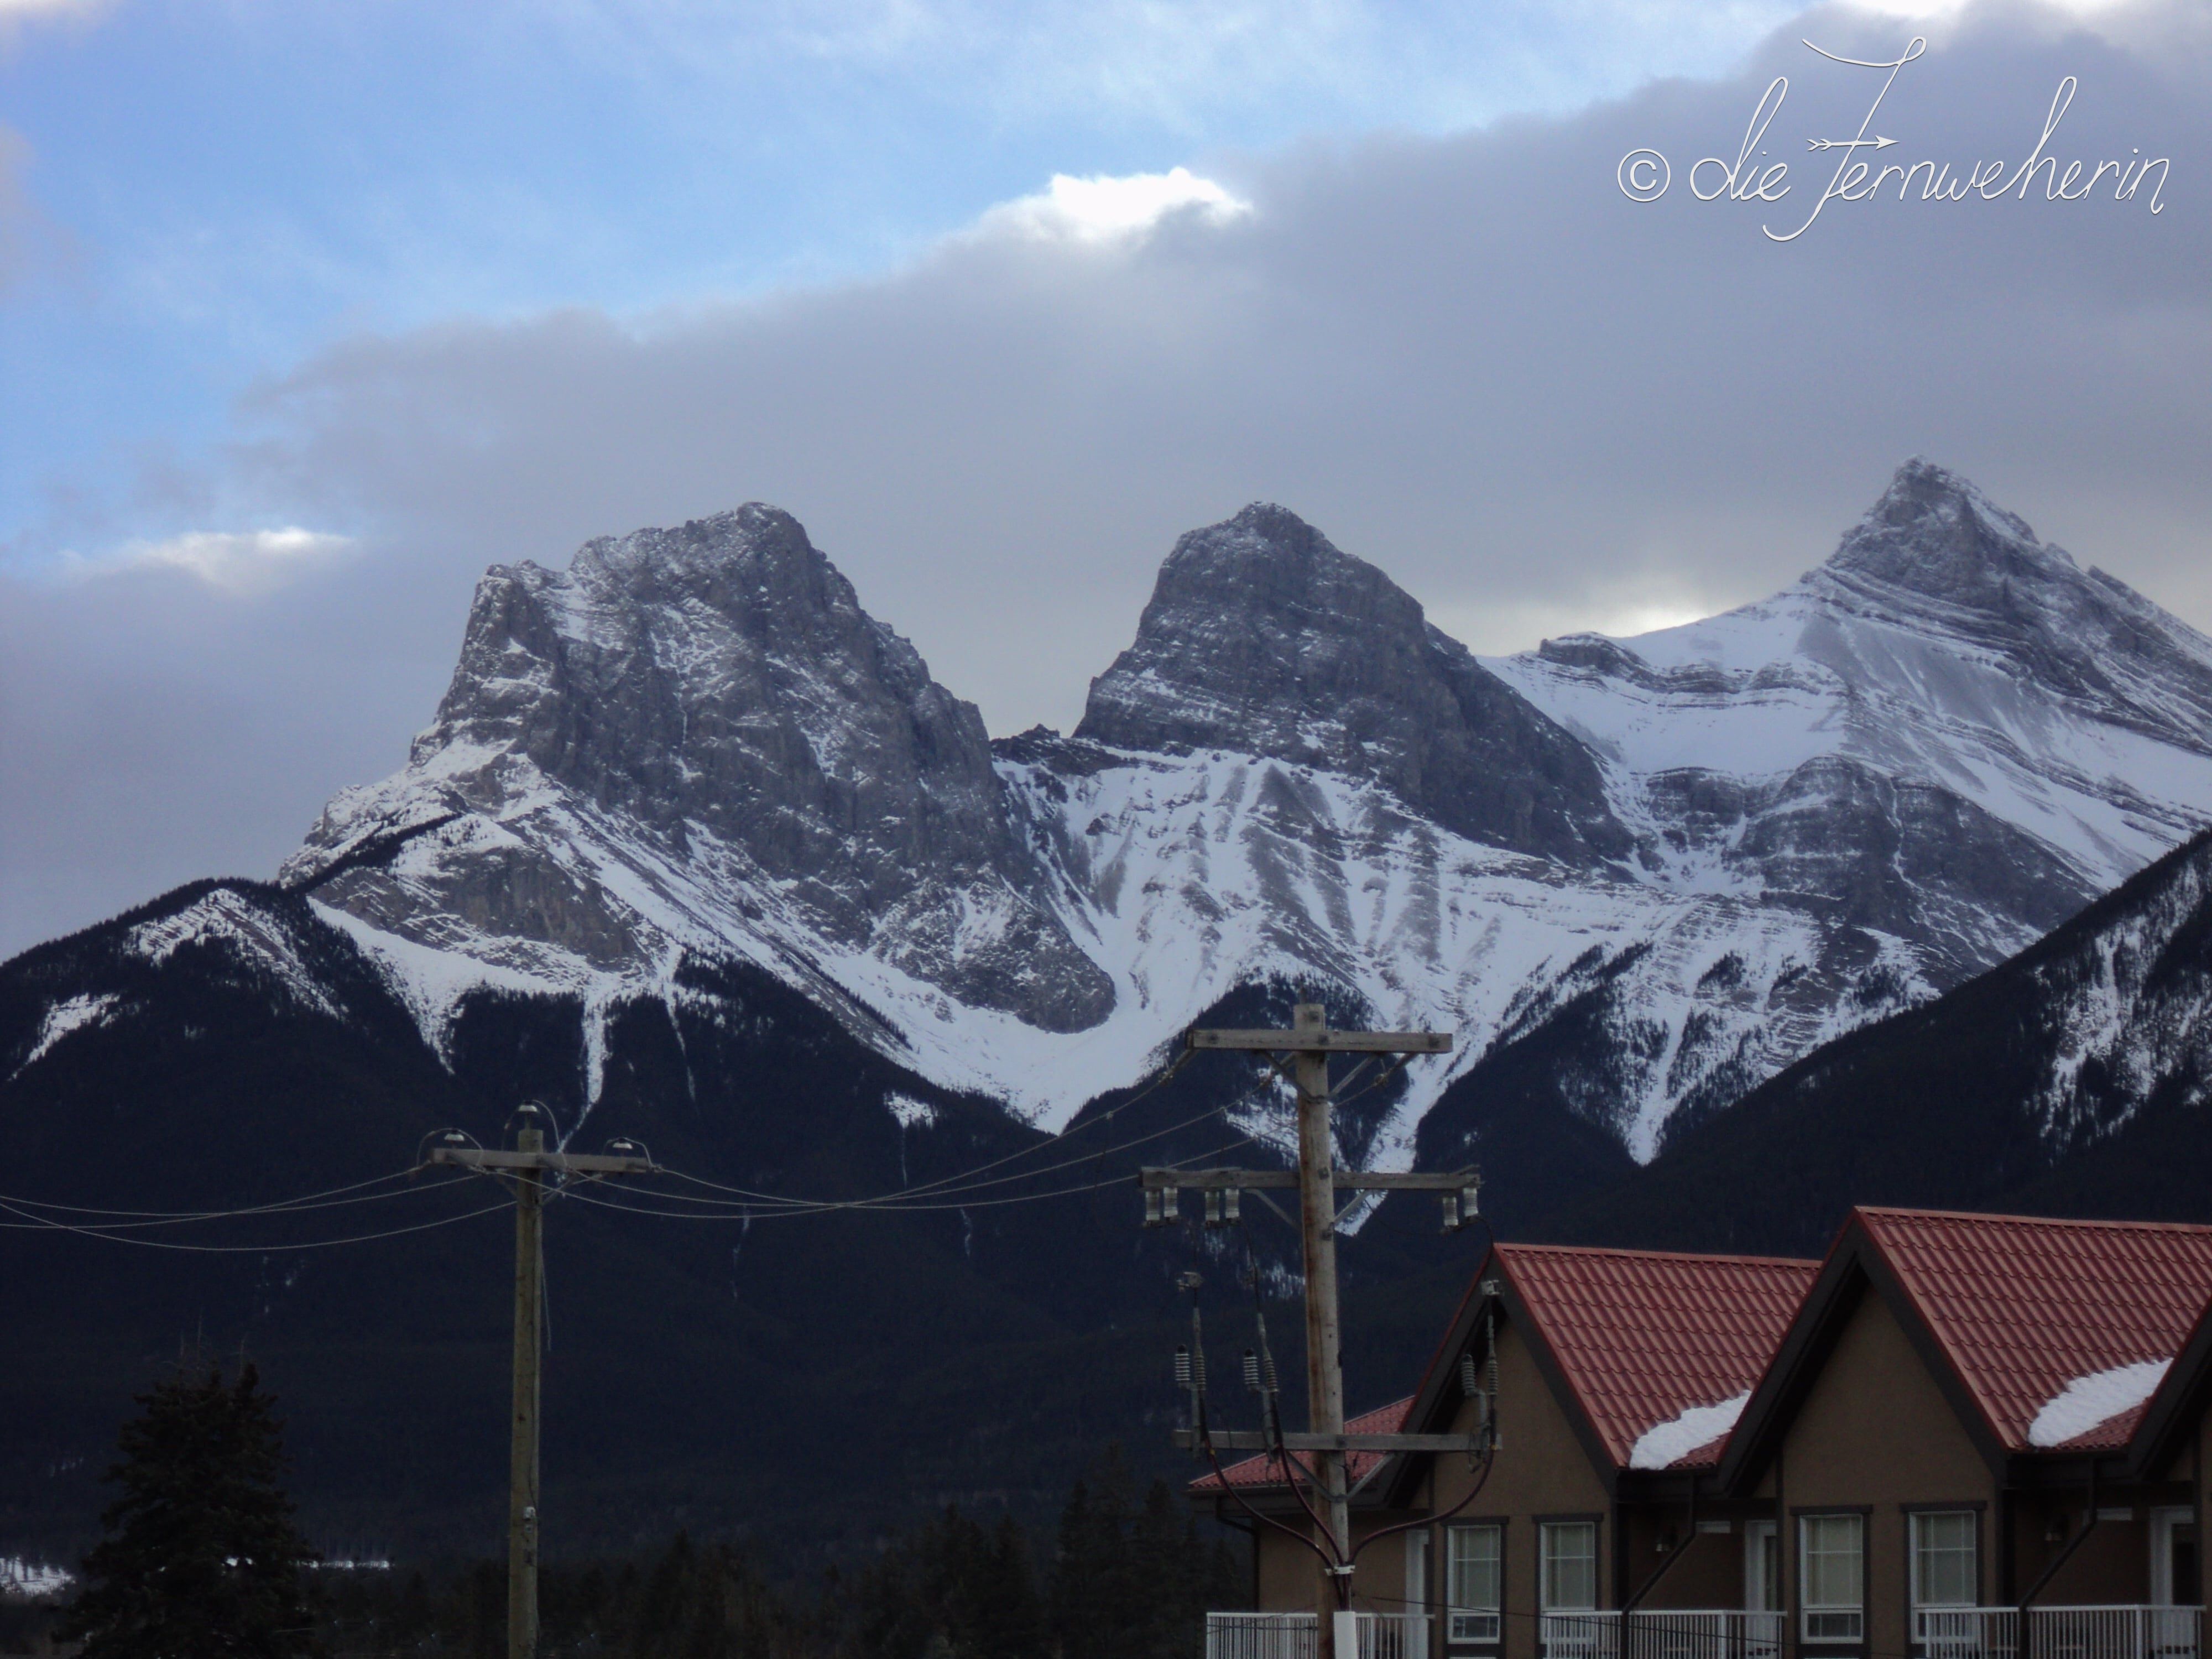 Canmore's most famous mountains (The Three Sisters) as seen from the Bow Valley Trail.